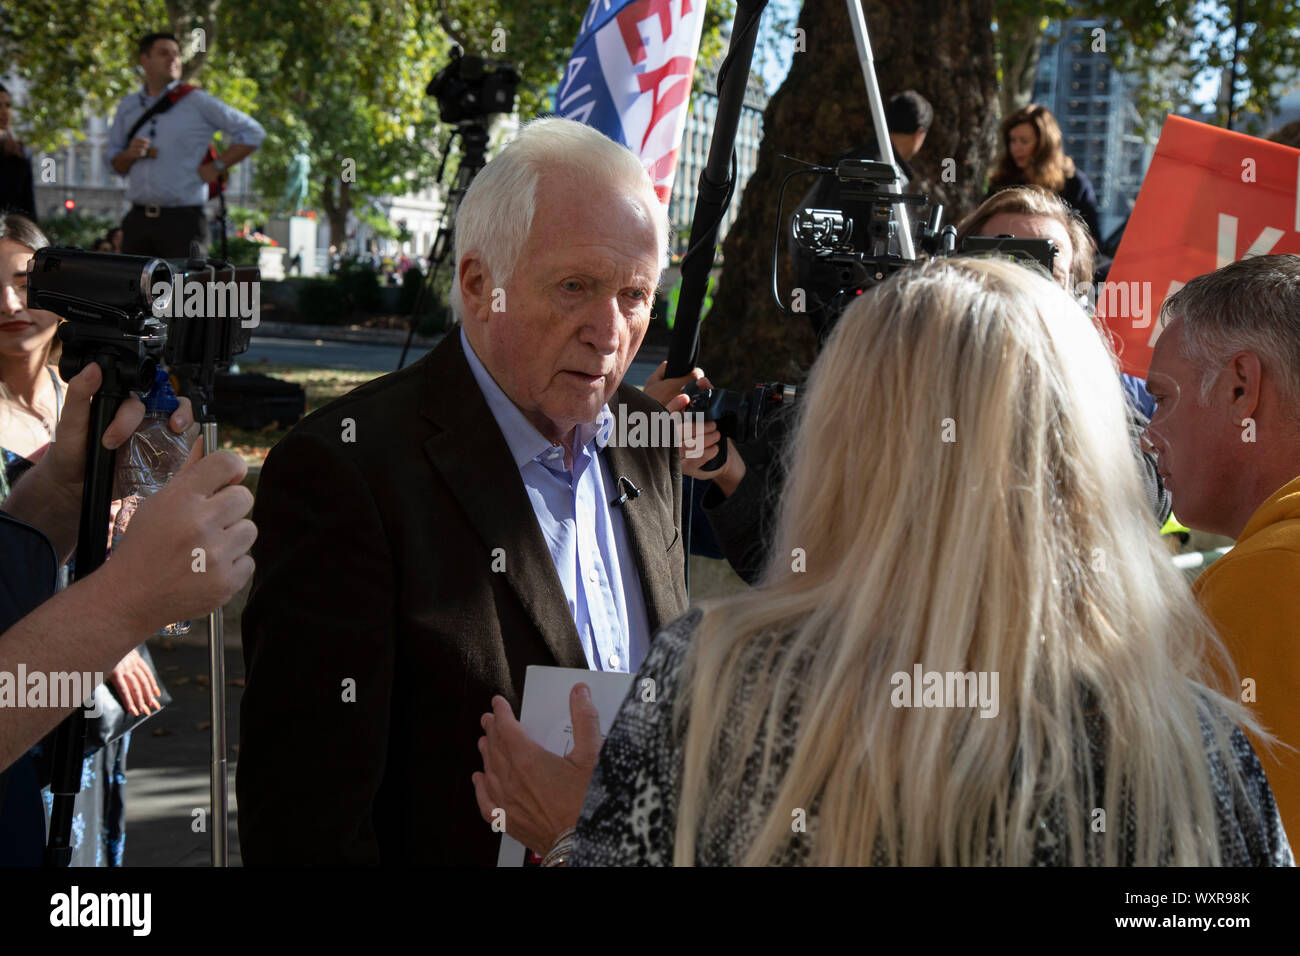 Television presenter and broadcaster David Dimbleby speaks to pro-leave protesters outside The Supreme Court as the first day of the hearing to rule on the legality of suspending or proroguing Parliament begins on September 17th 2019 in London, United Kingdom. The ruling will be made by 11 judges in the coming days to determine if the action of Prime Minister Boris Johnson to suspend parliament and his advice to do so given to the Queen was unlawful. David Dimbleby is a British journalist and former presenter of current affairs and political programmes, now best known for the BBCs long-running Stock Photo